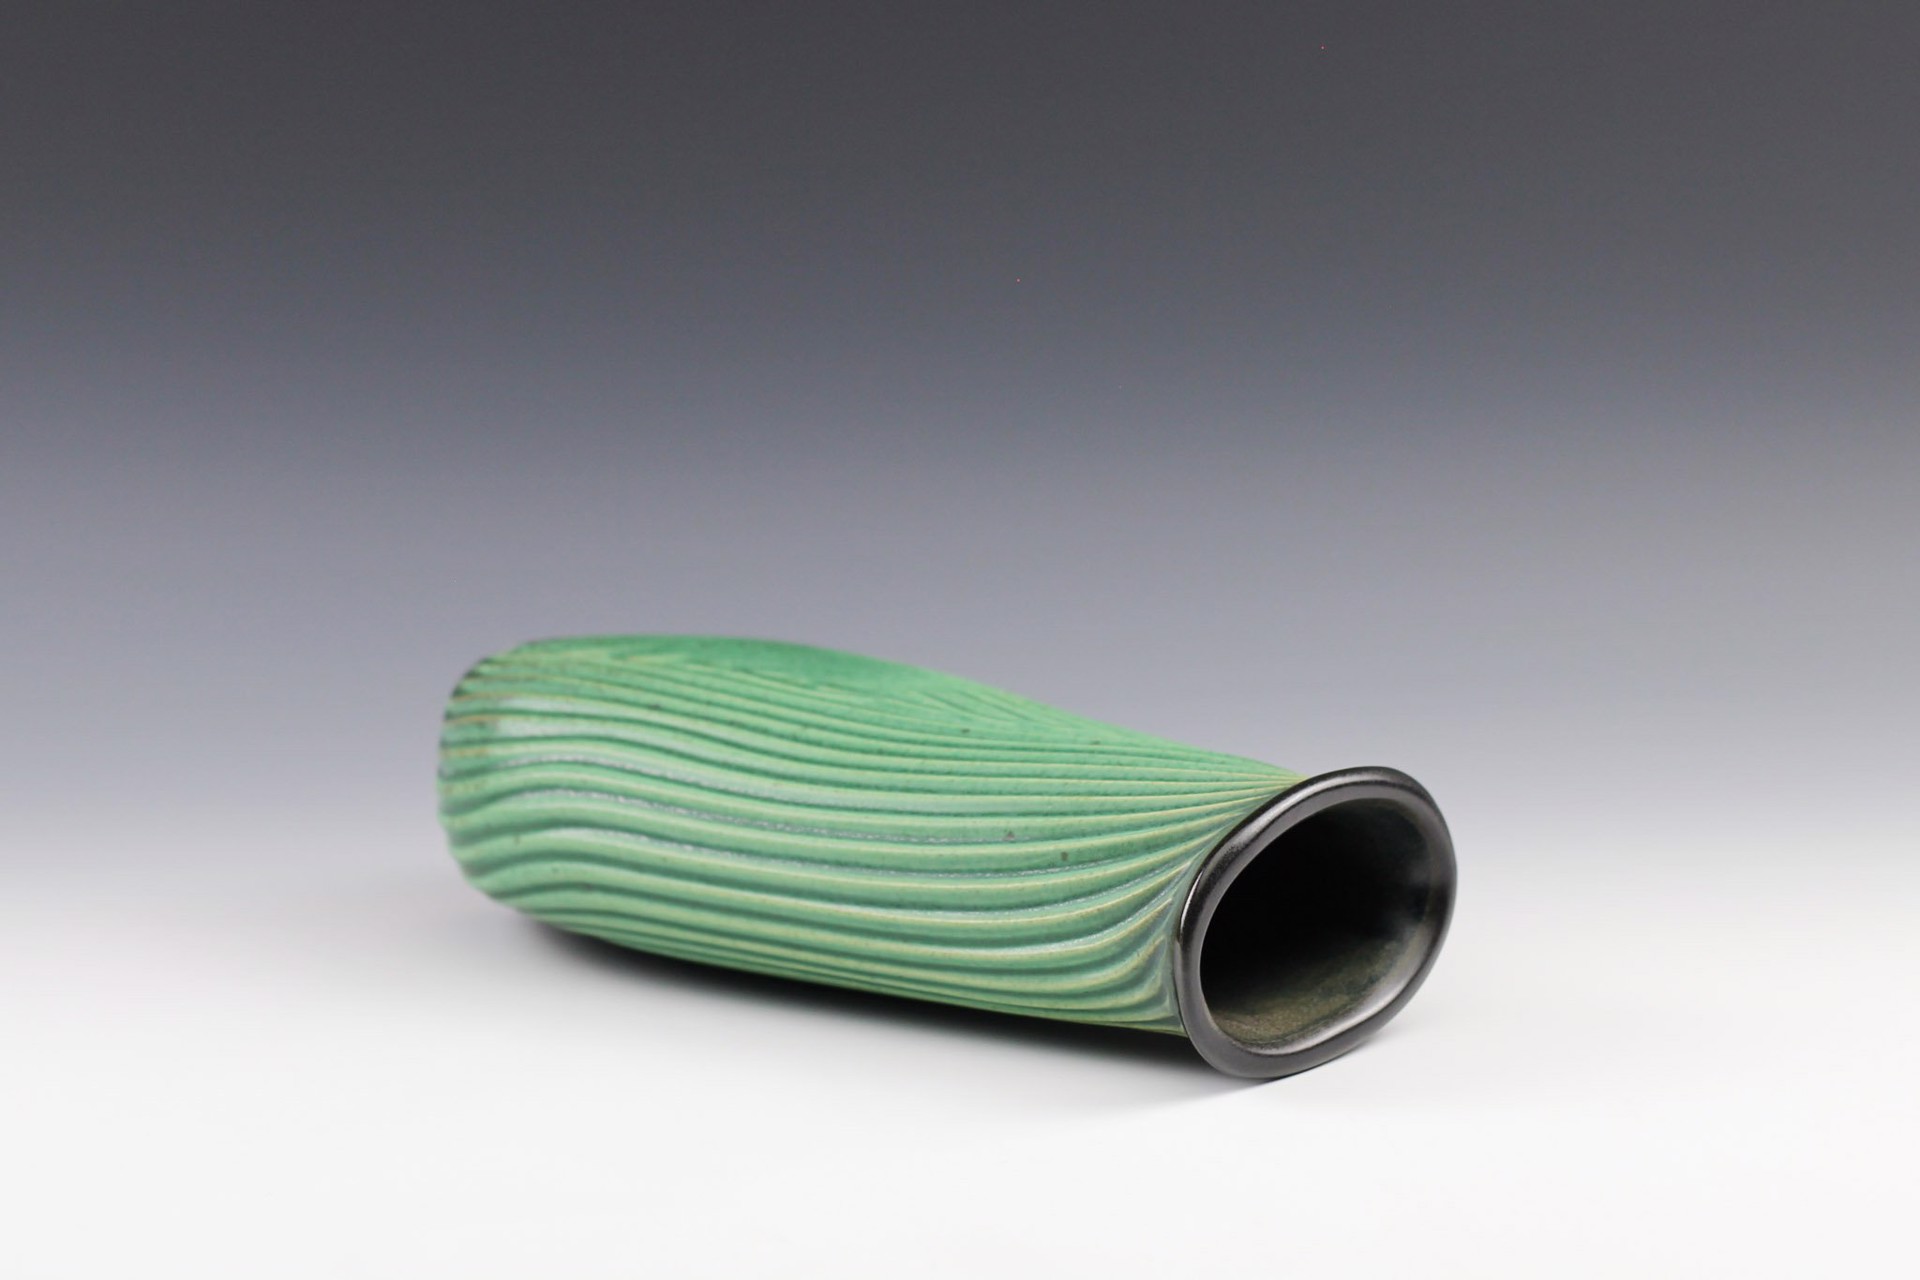 Tall Green Vase by Paul Jeselskis